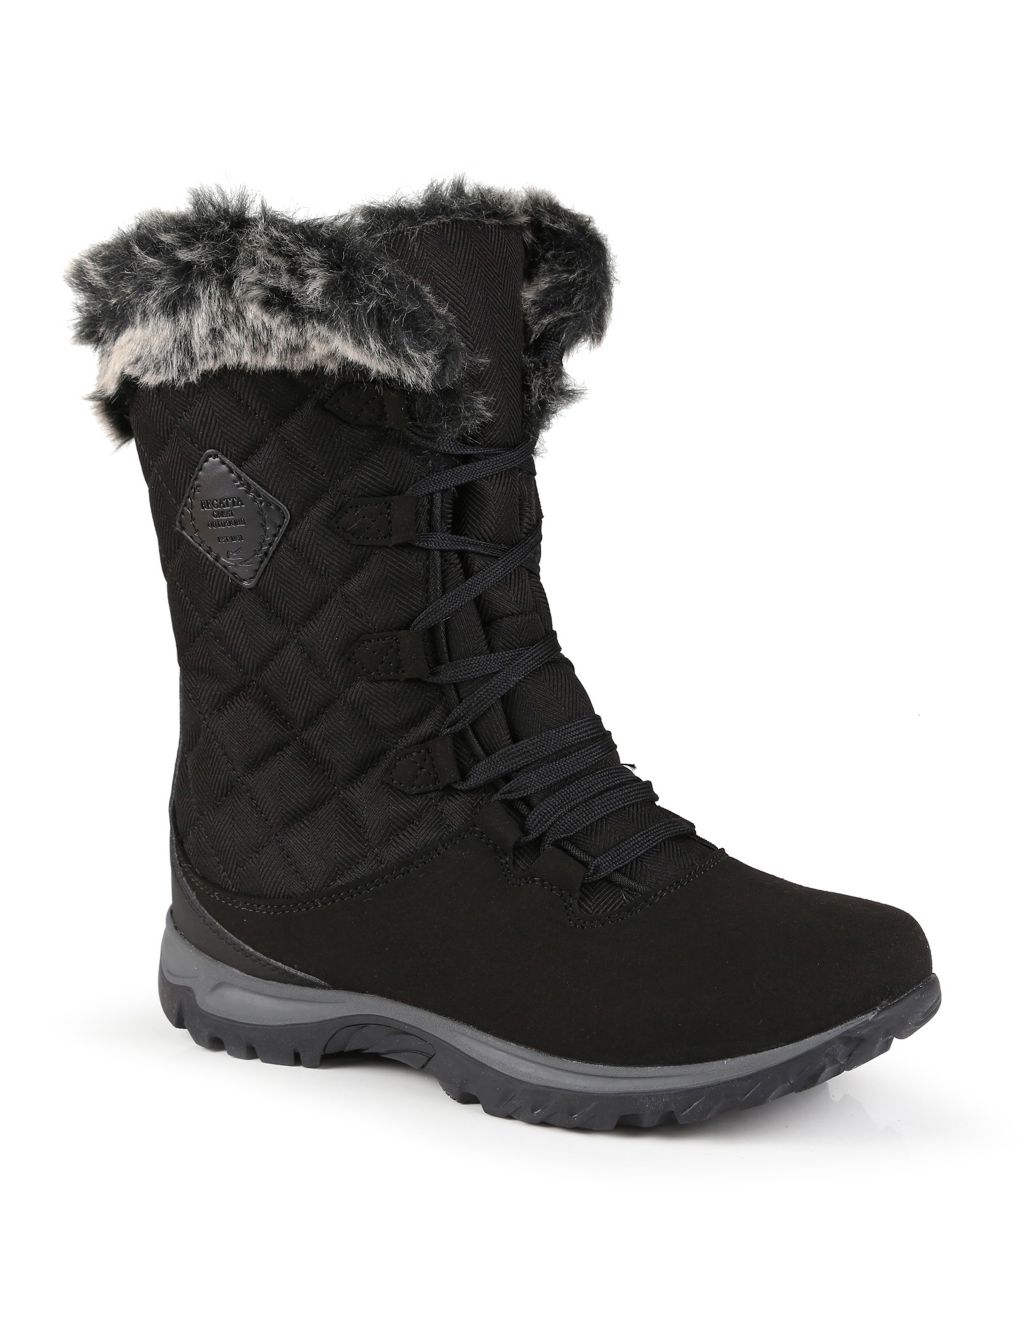 Lady Newley Thermo Winter Boots image 2